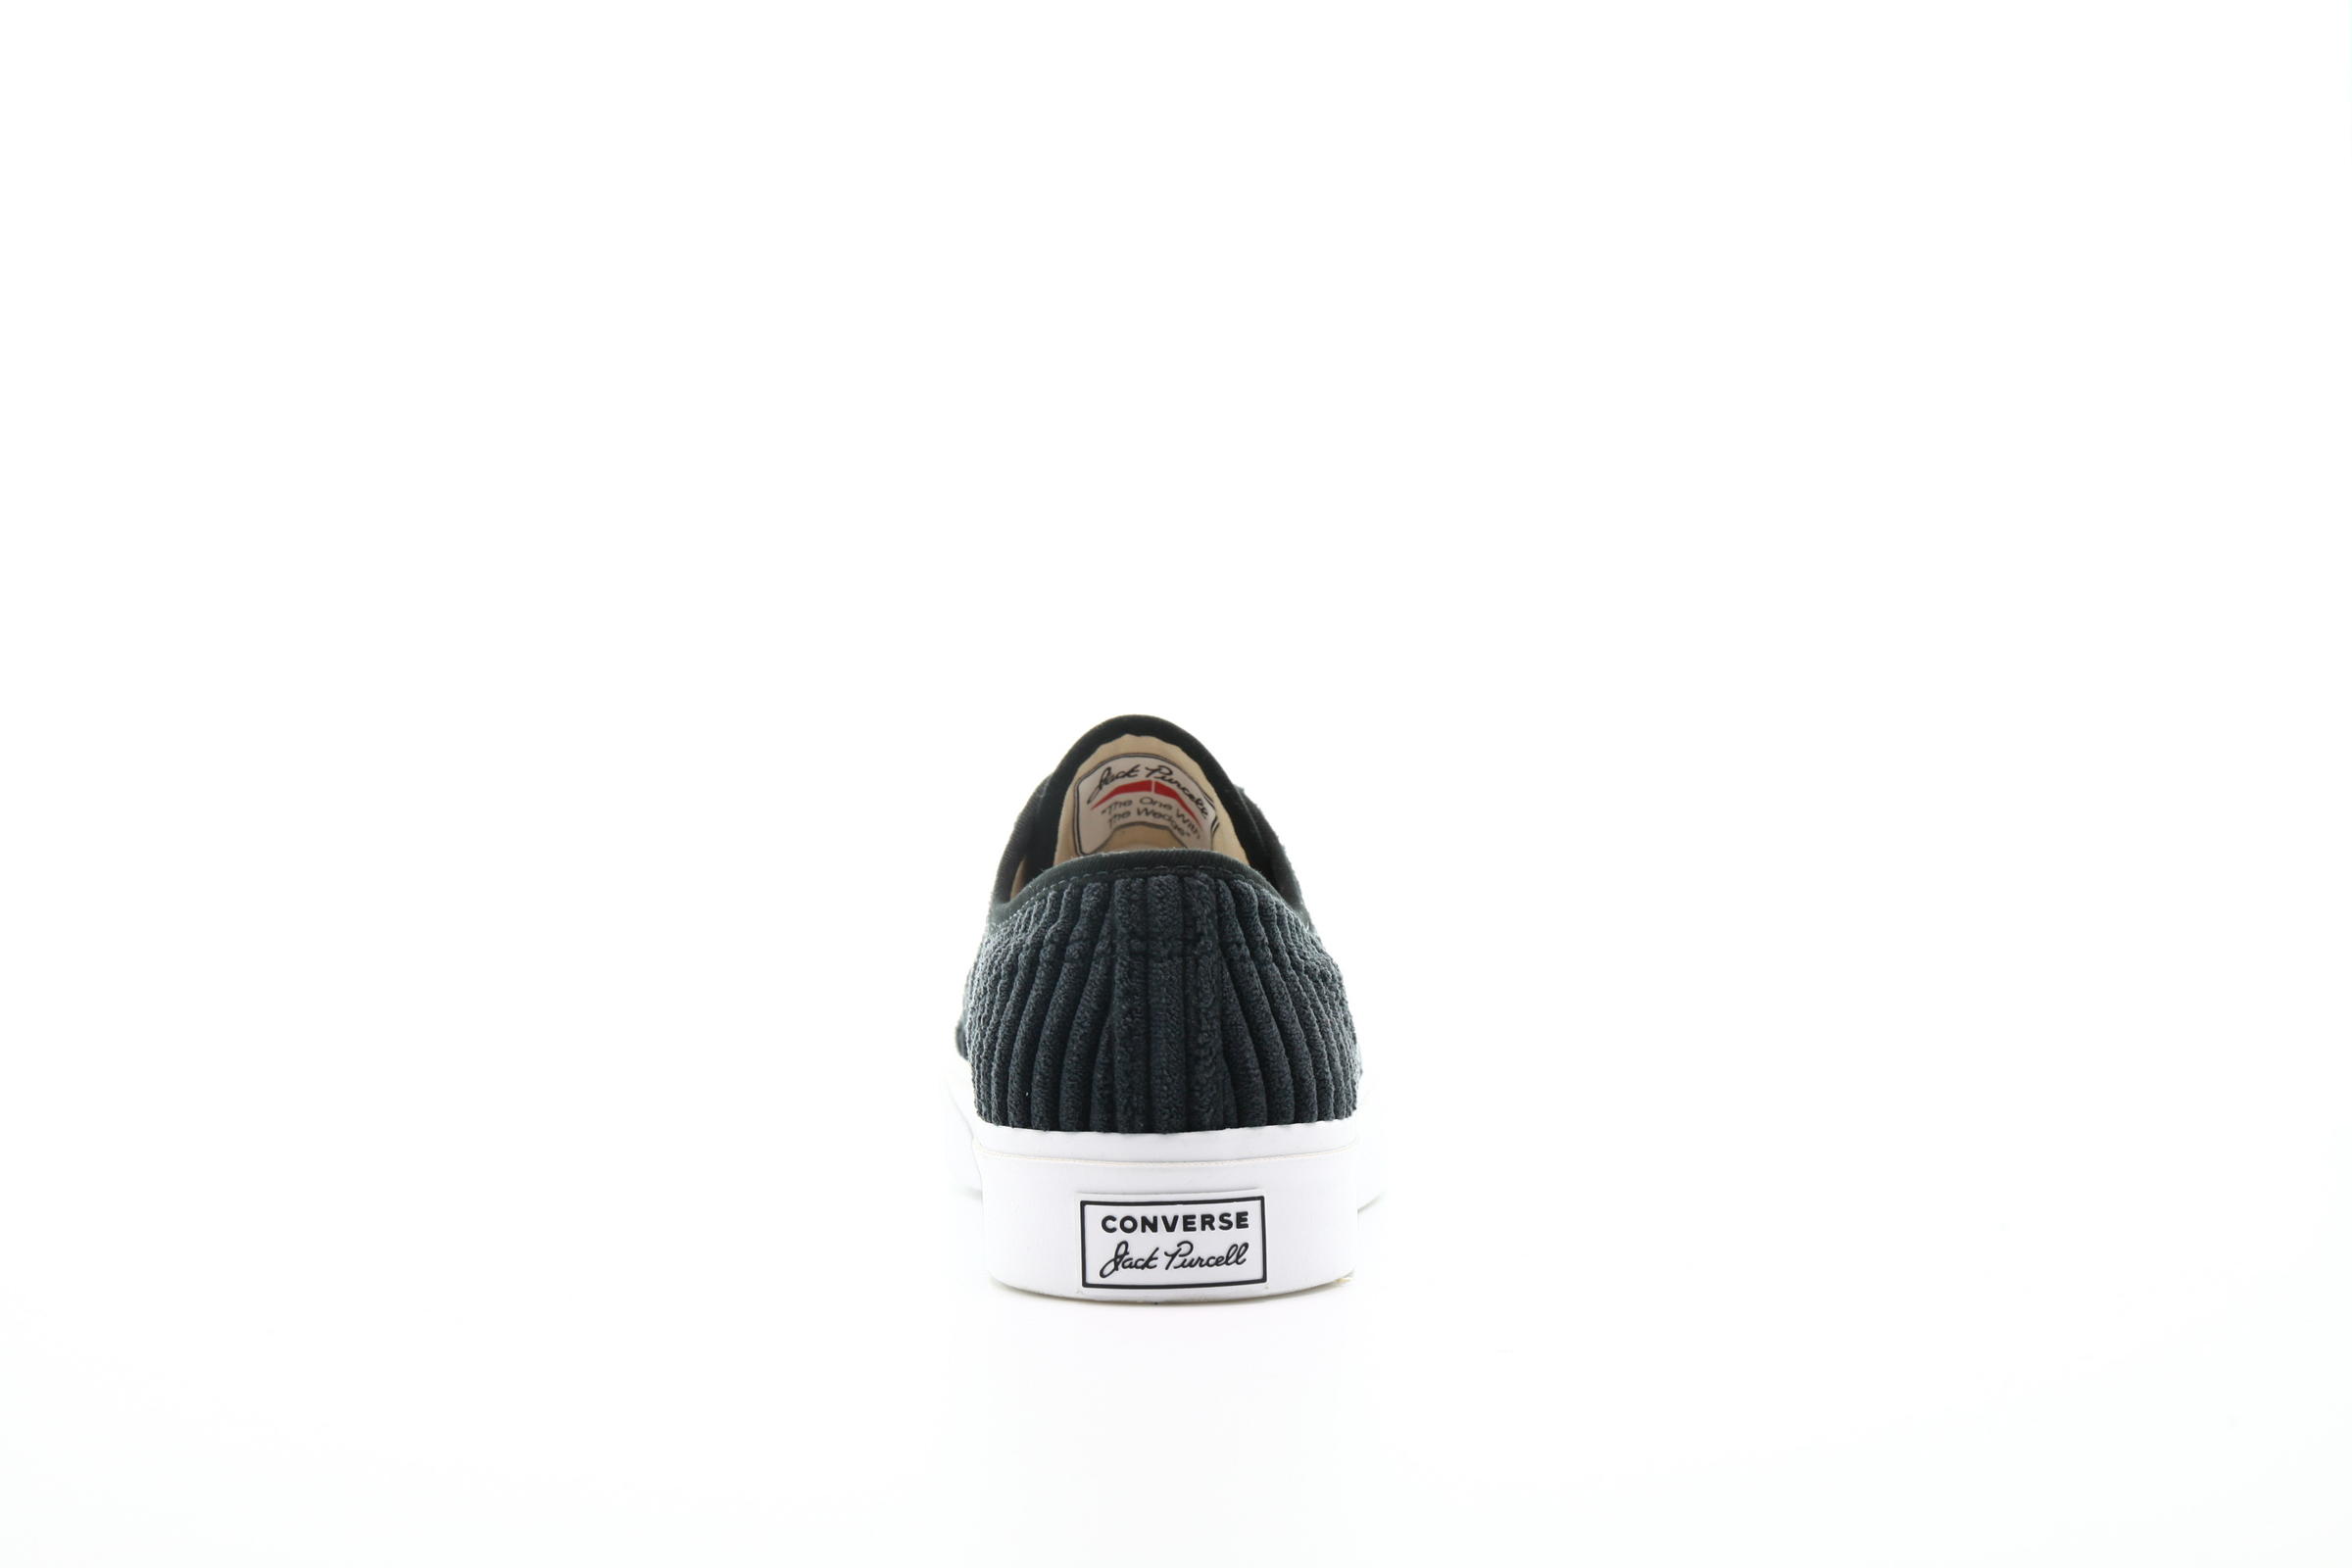 Converse Jack Purcell OX Wide Wale Cord "Black"